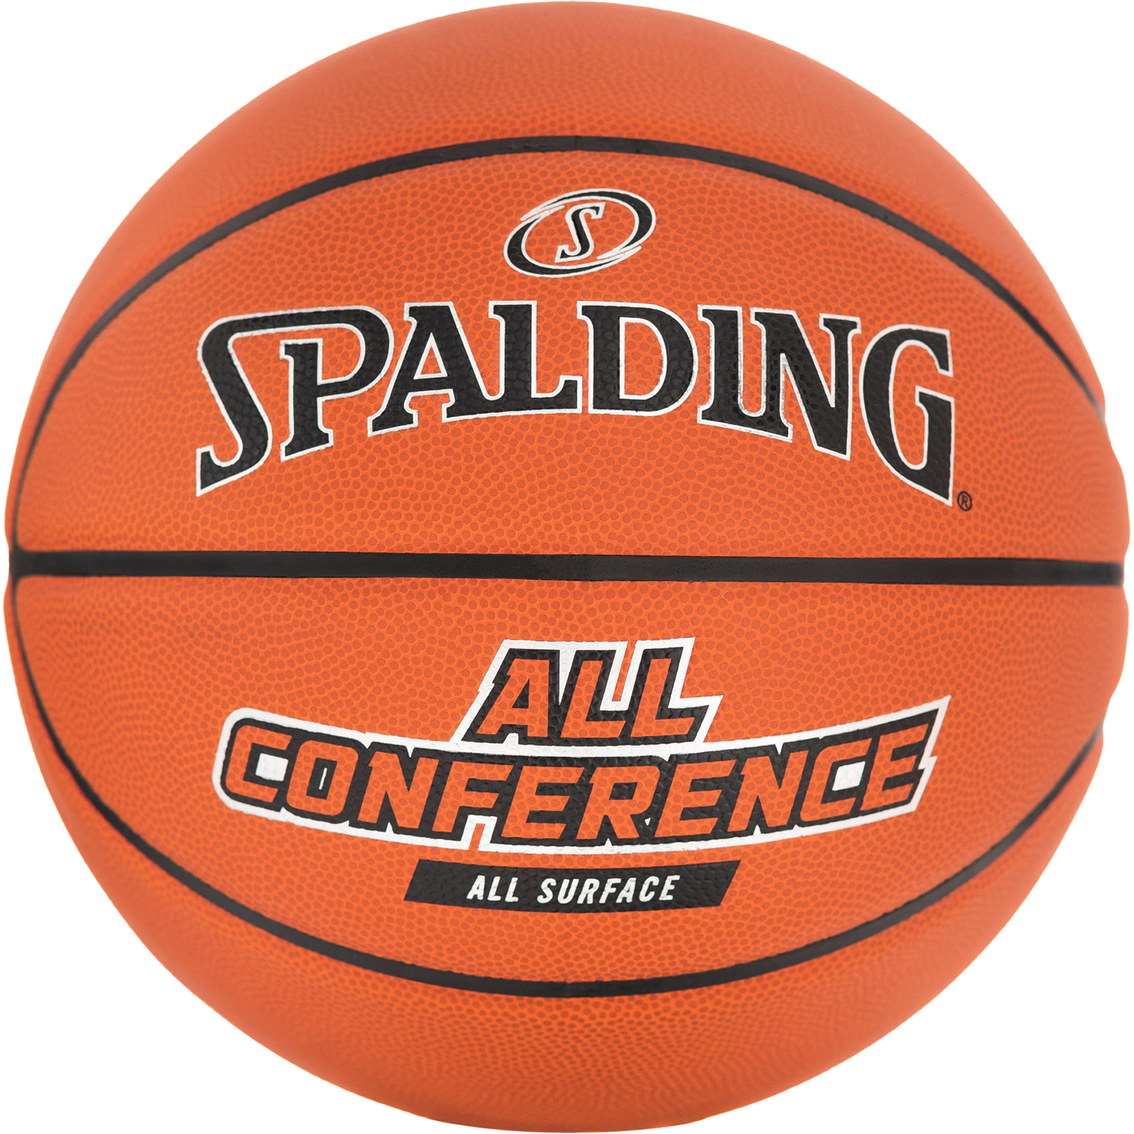 Spalding All-Conference Composite Indoor/Outdoor Adult 29.5 in. Basketball